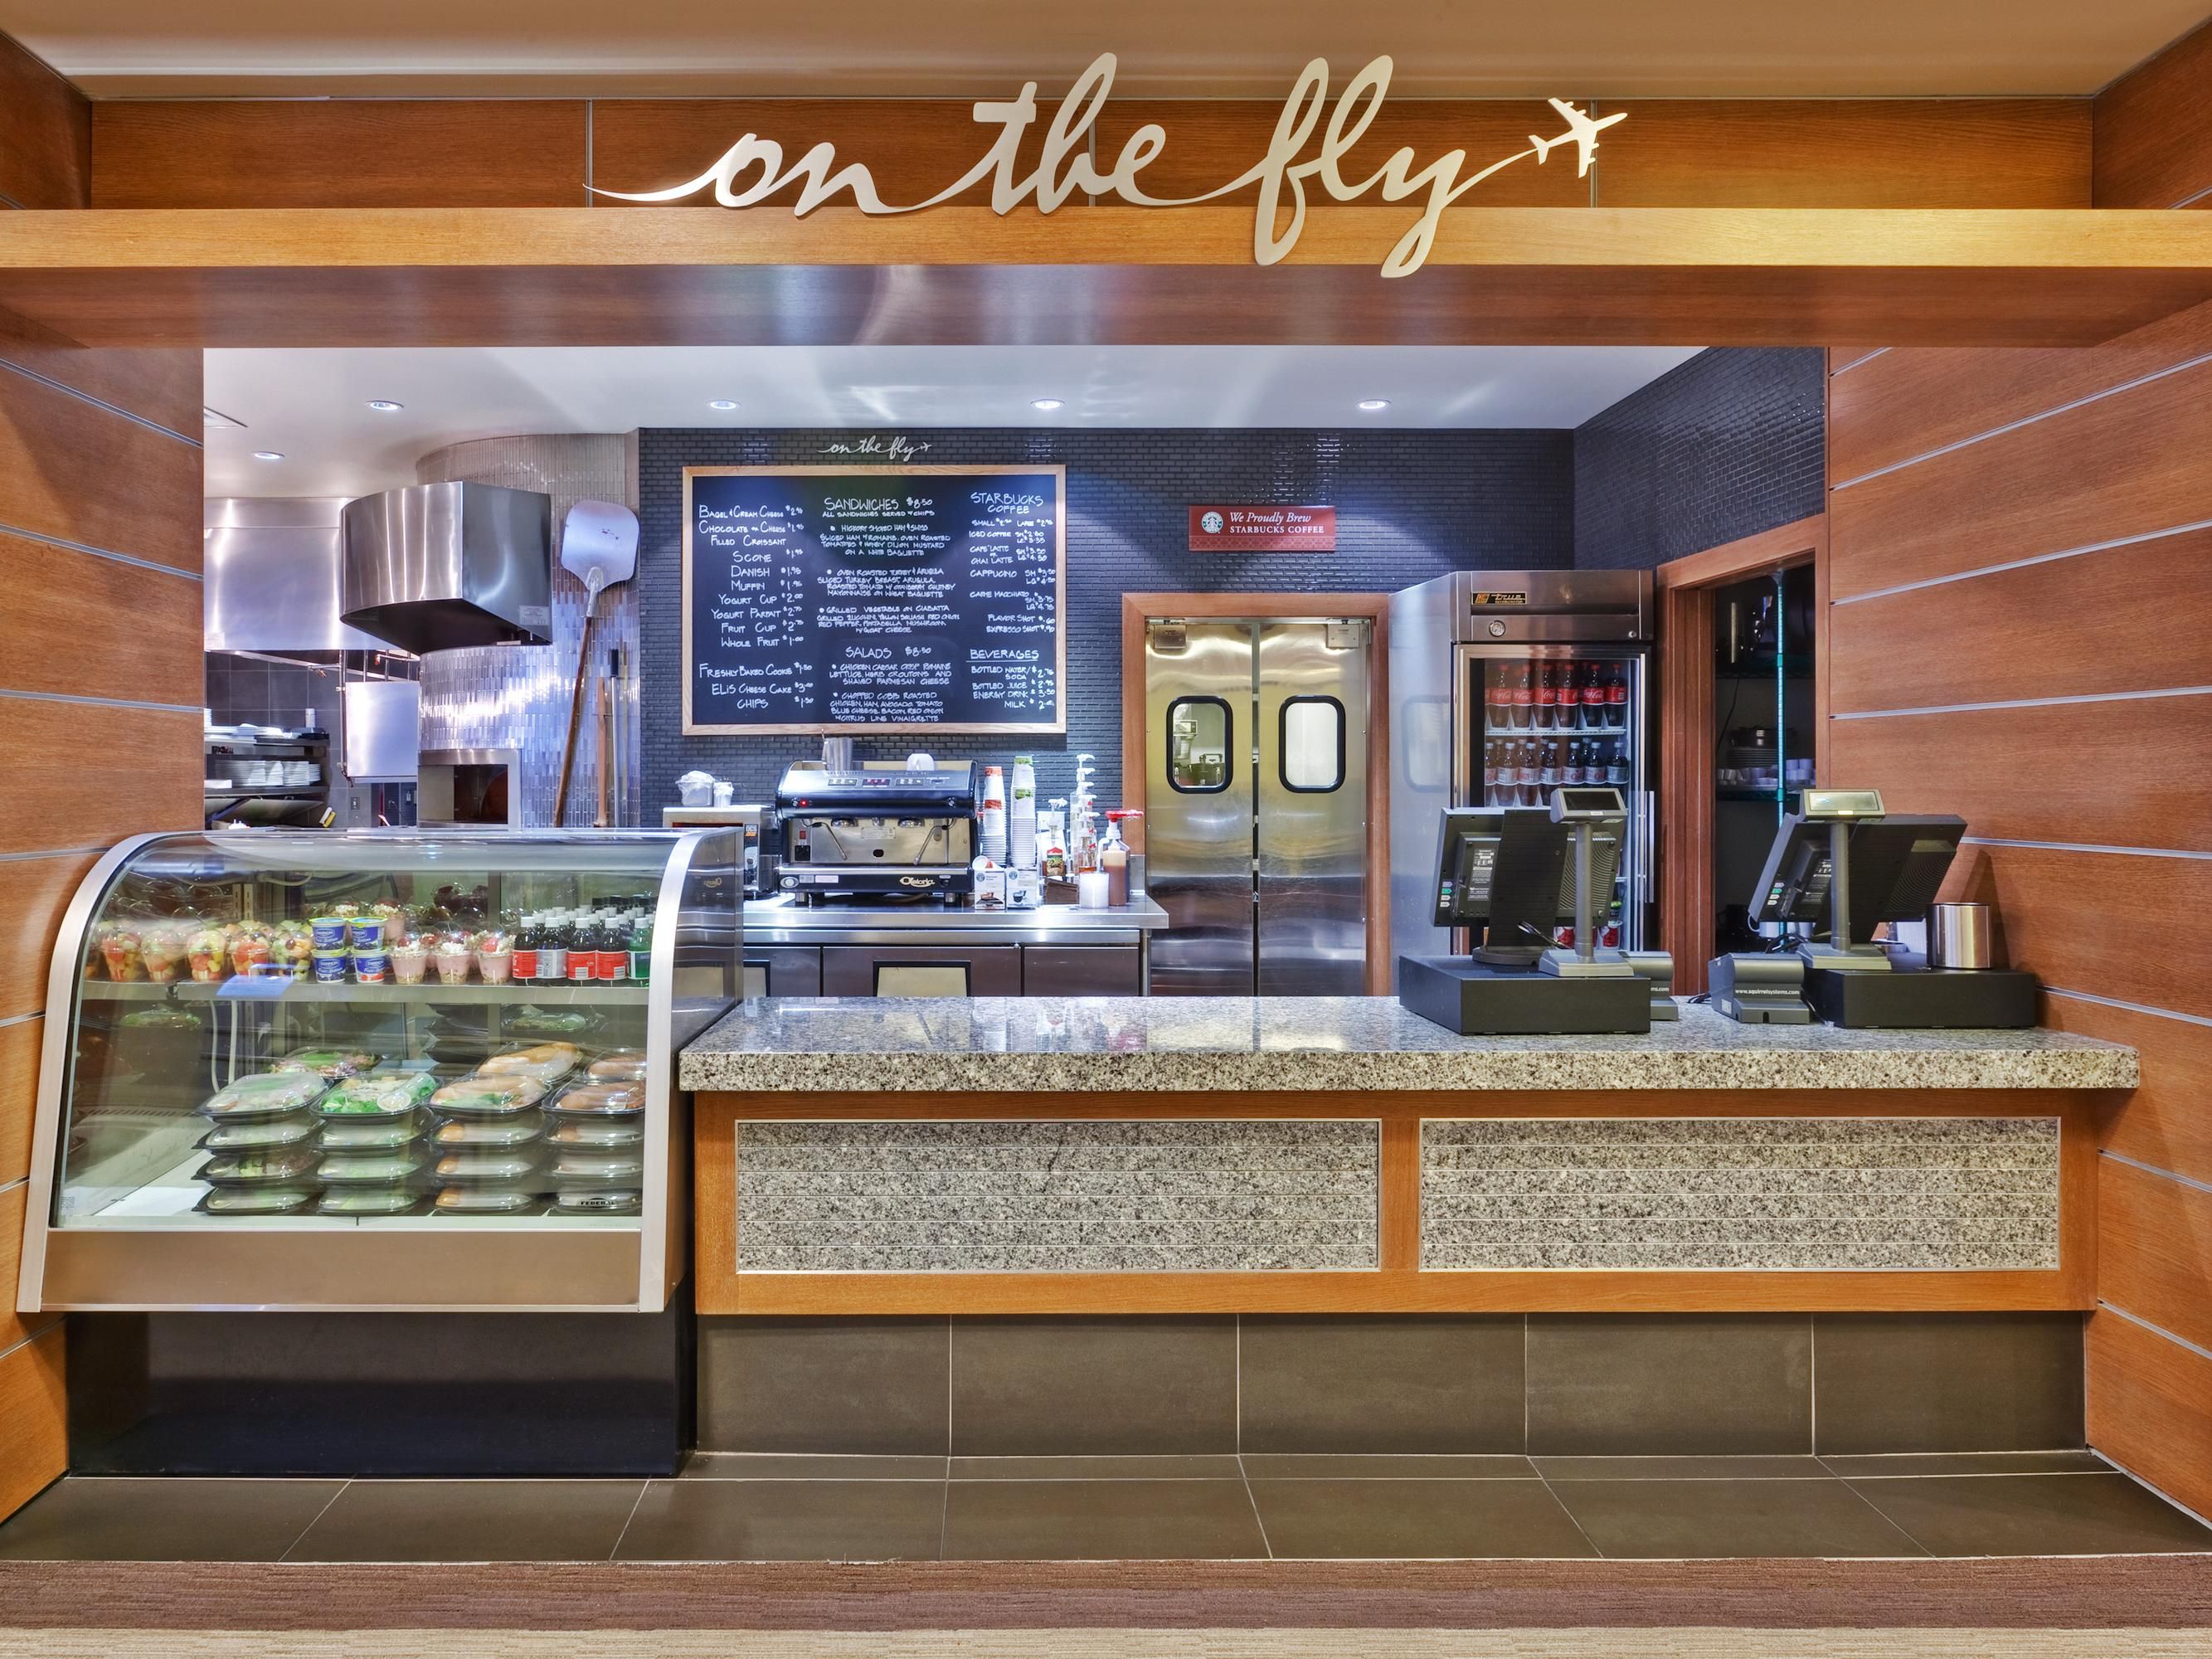 Located on the ground floor, On the Fly is our convenient grab & go restaurant, delivering delicious, classic American cuisine. Try one of the culinary creations at this café for breakfast. The restaurant is open from 6:00 AM -10:00 AM on weekdays and 6:00 AM - 11:00 AM on weekends.